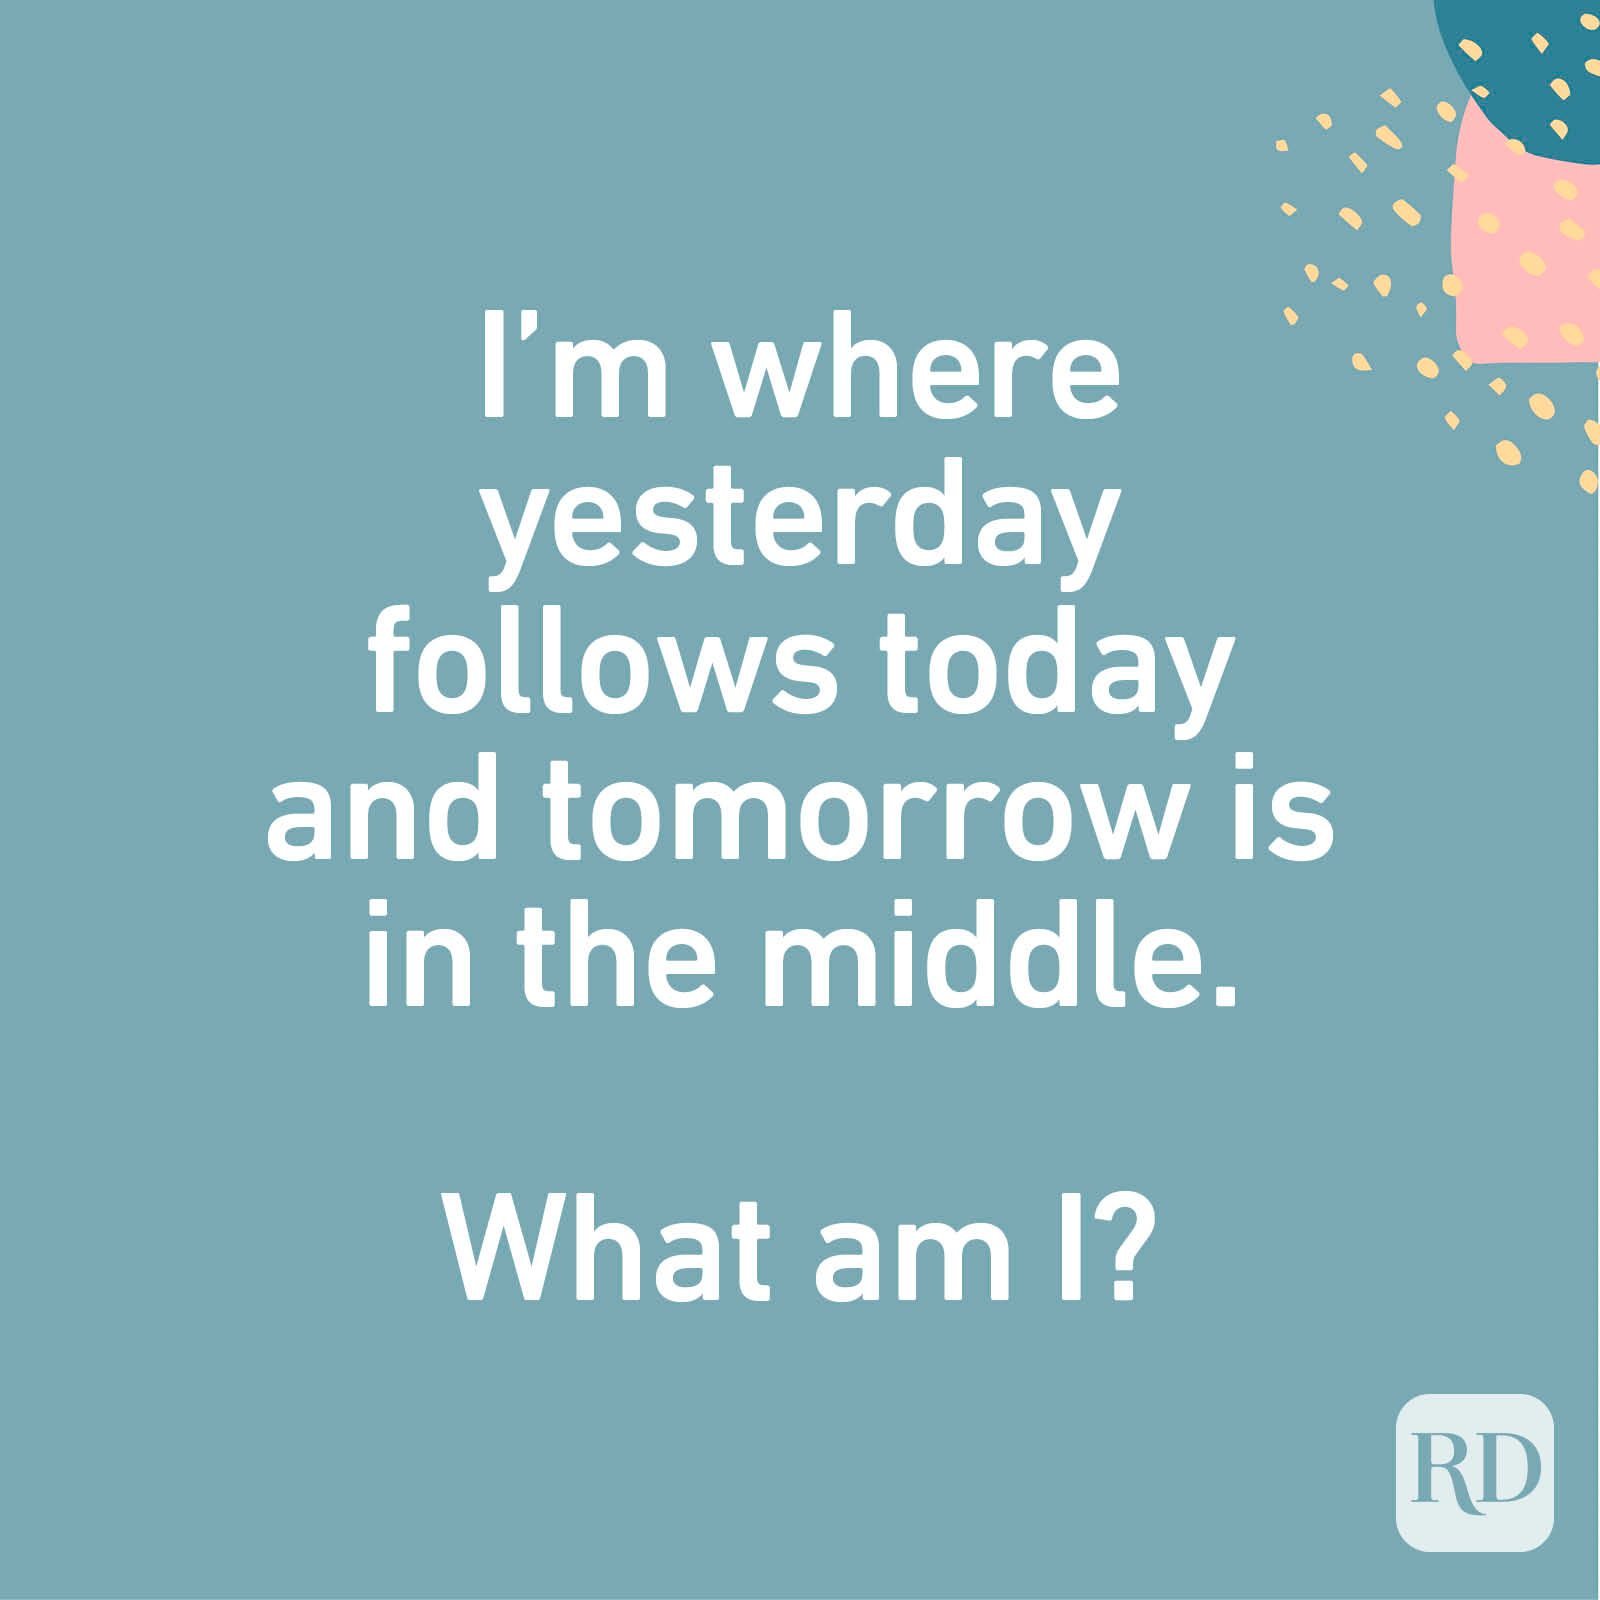 I'm where yesterday follows today and tomorrow is in the middle. What am I?